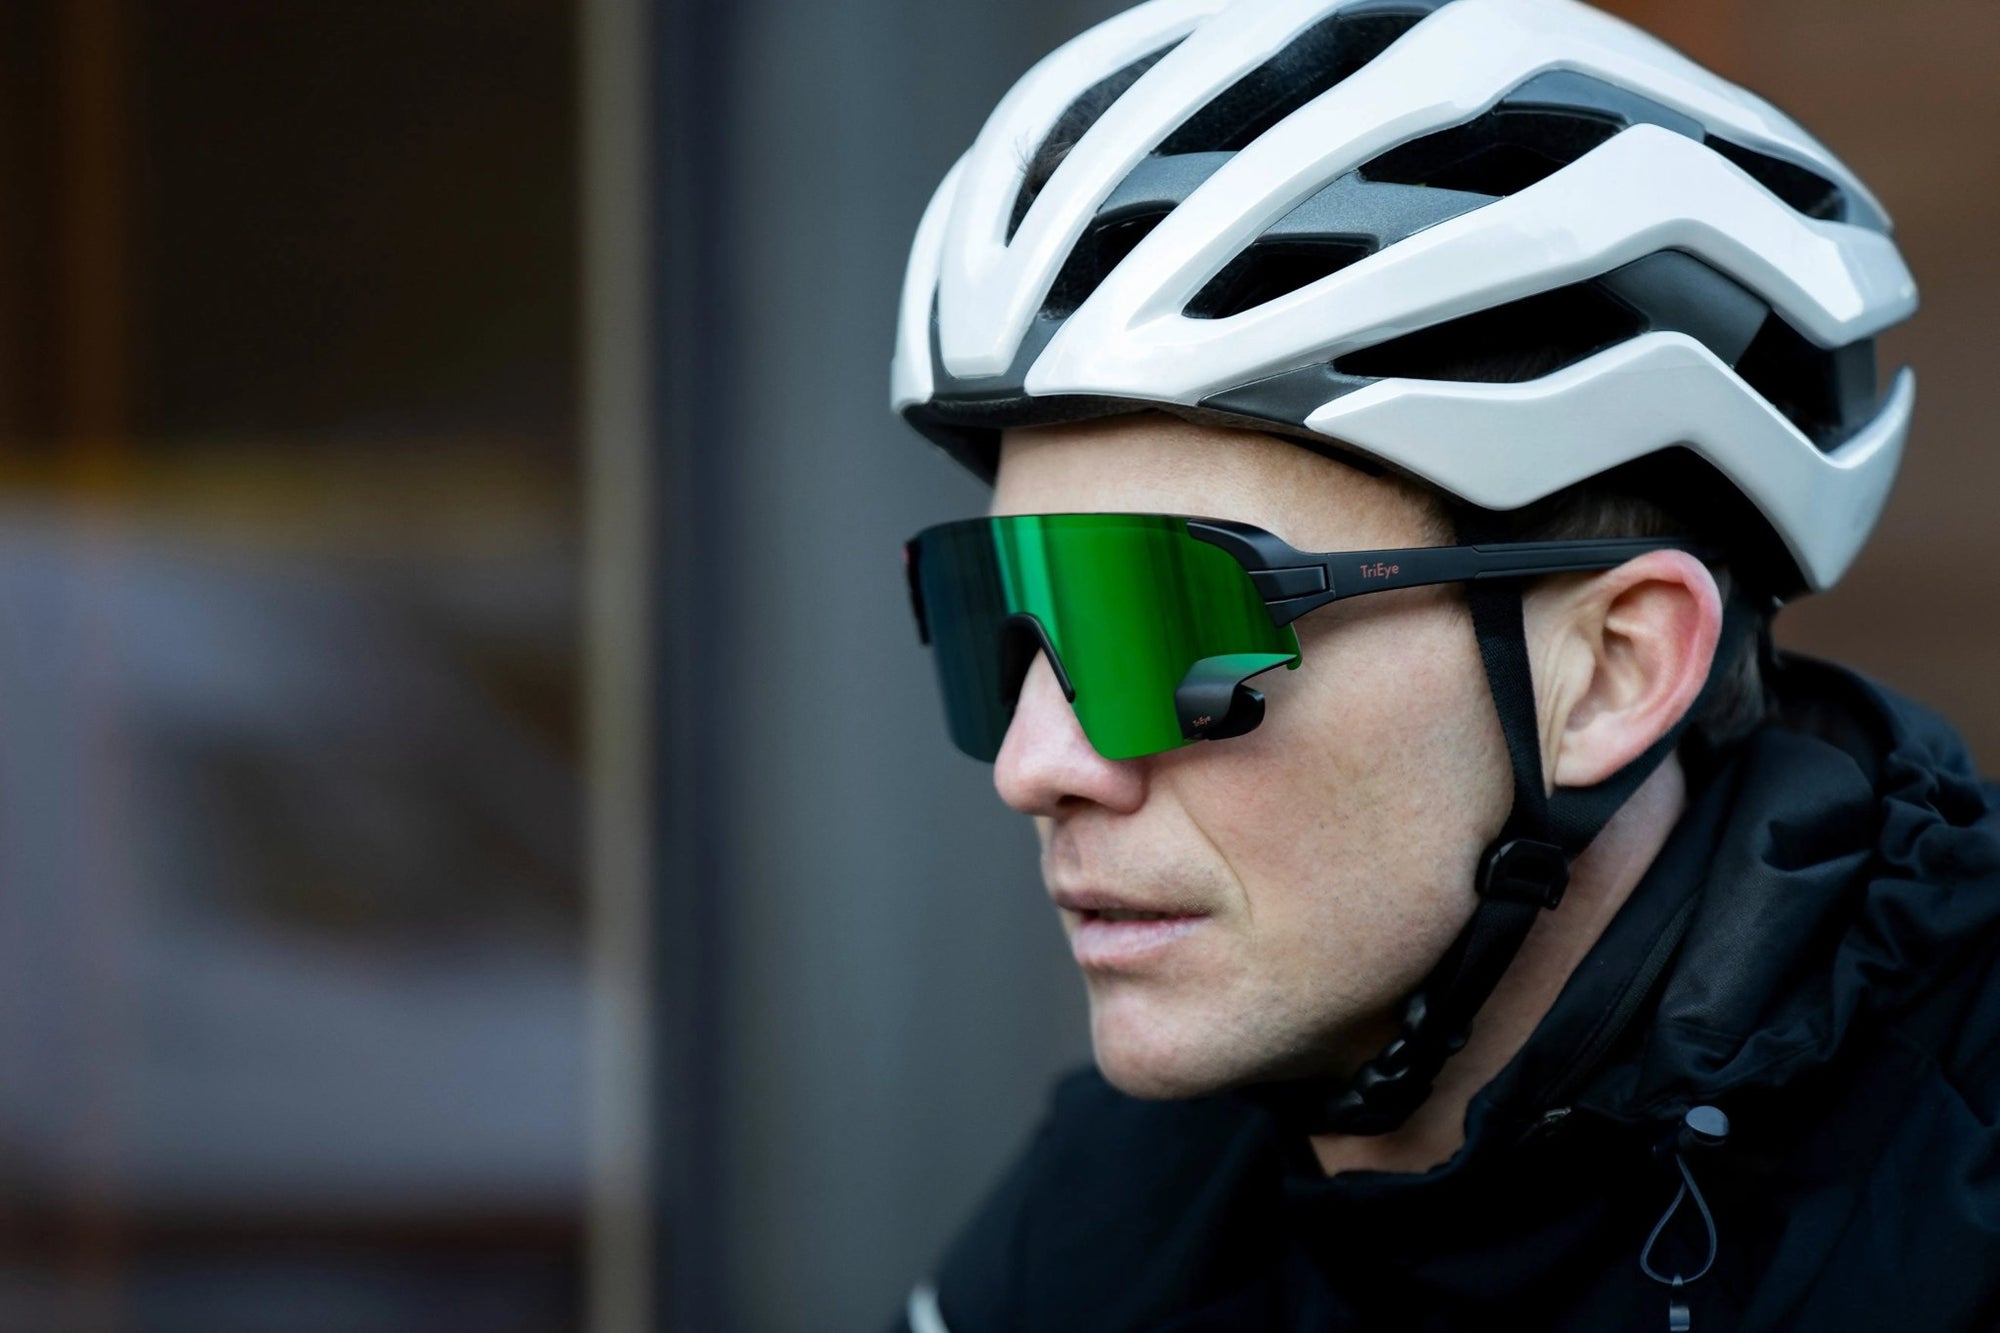 Best Nike Cycling Sunglasses, Top 5 for Your Ride